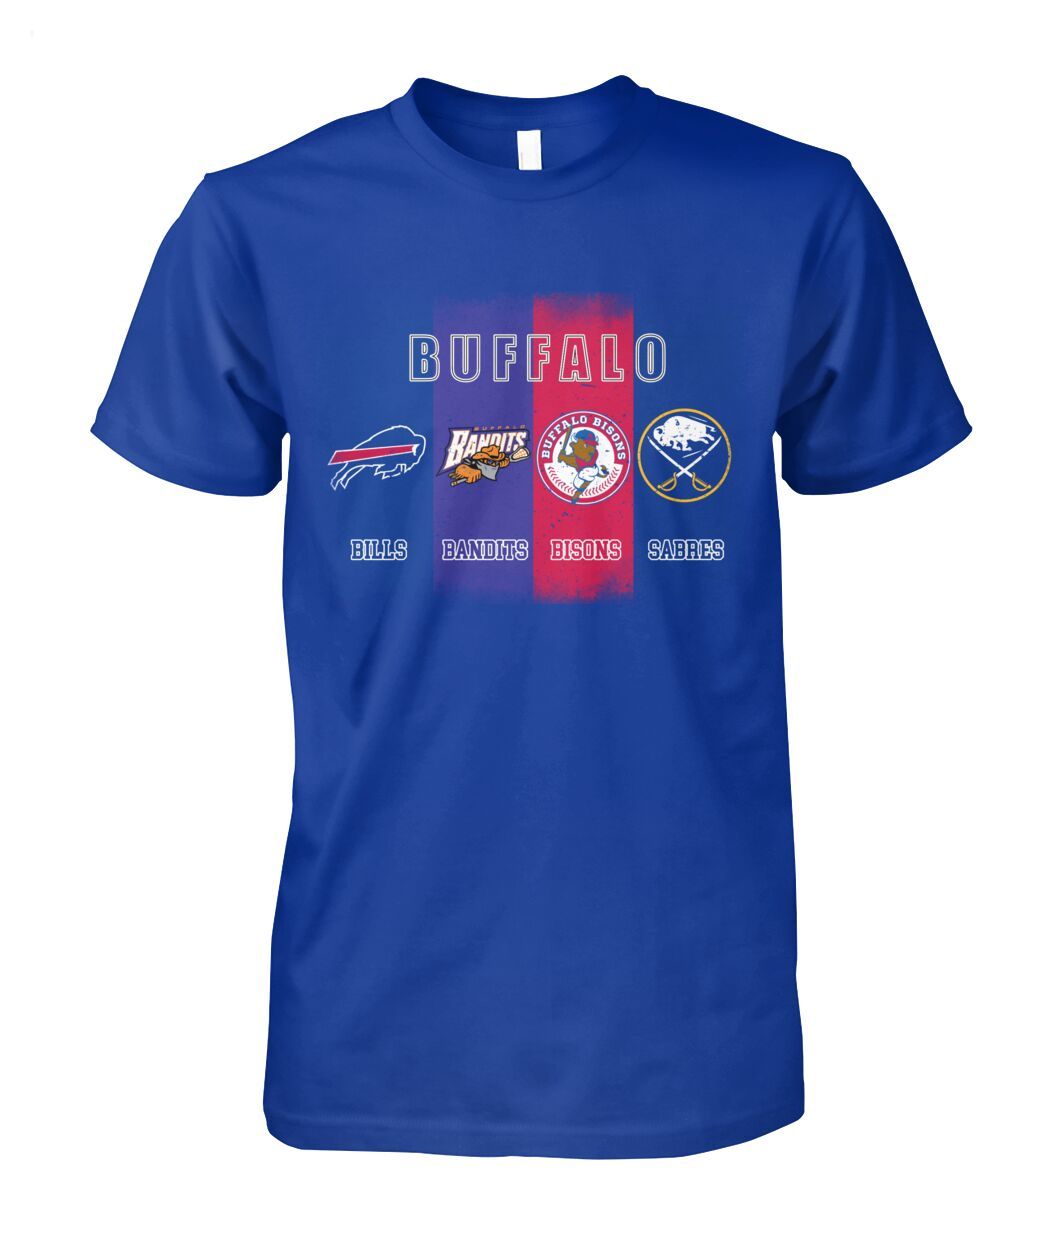 Buffalo-Bills-And-Bandits-And-Bisons-And-Sabres-T-Shirt-Limited-Edition_1